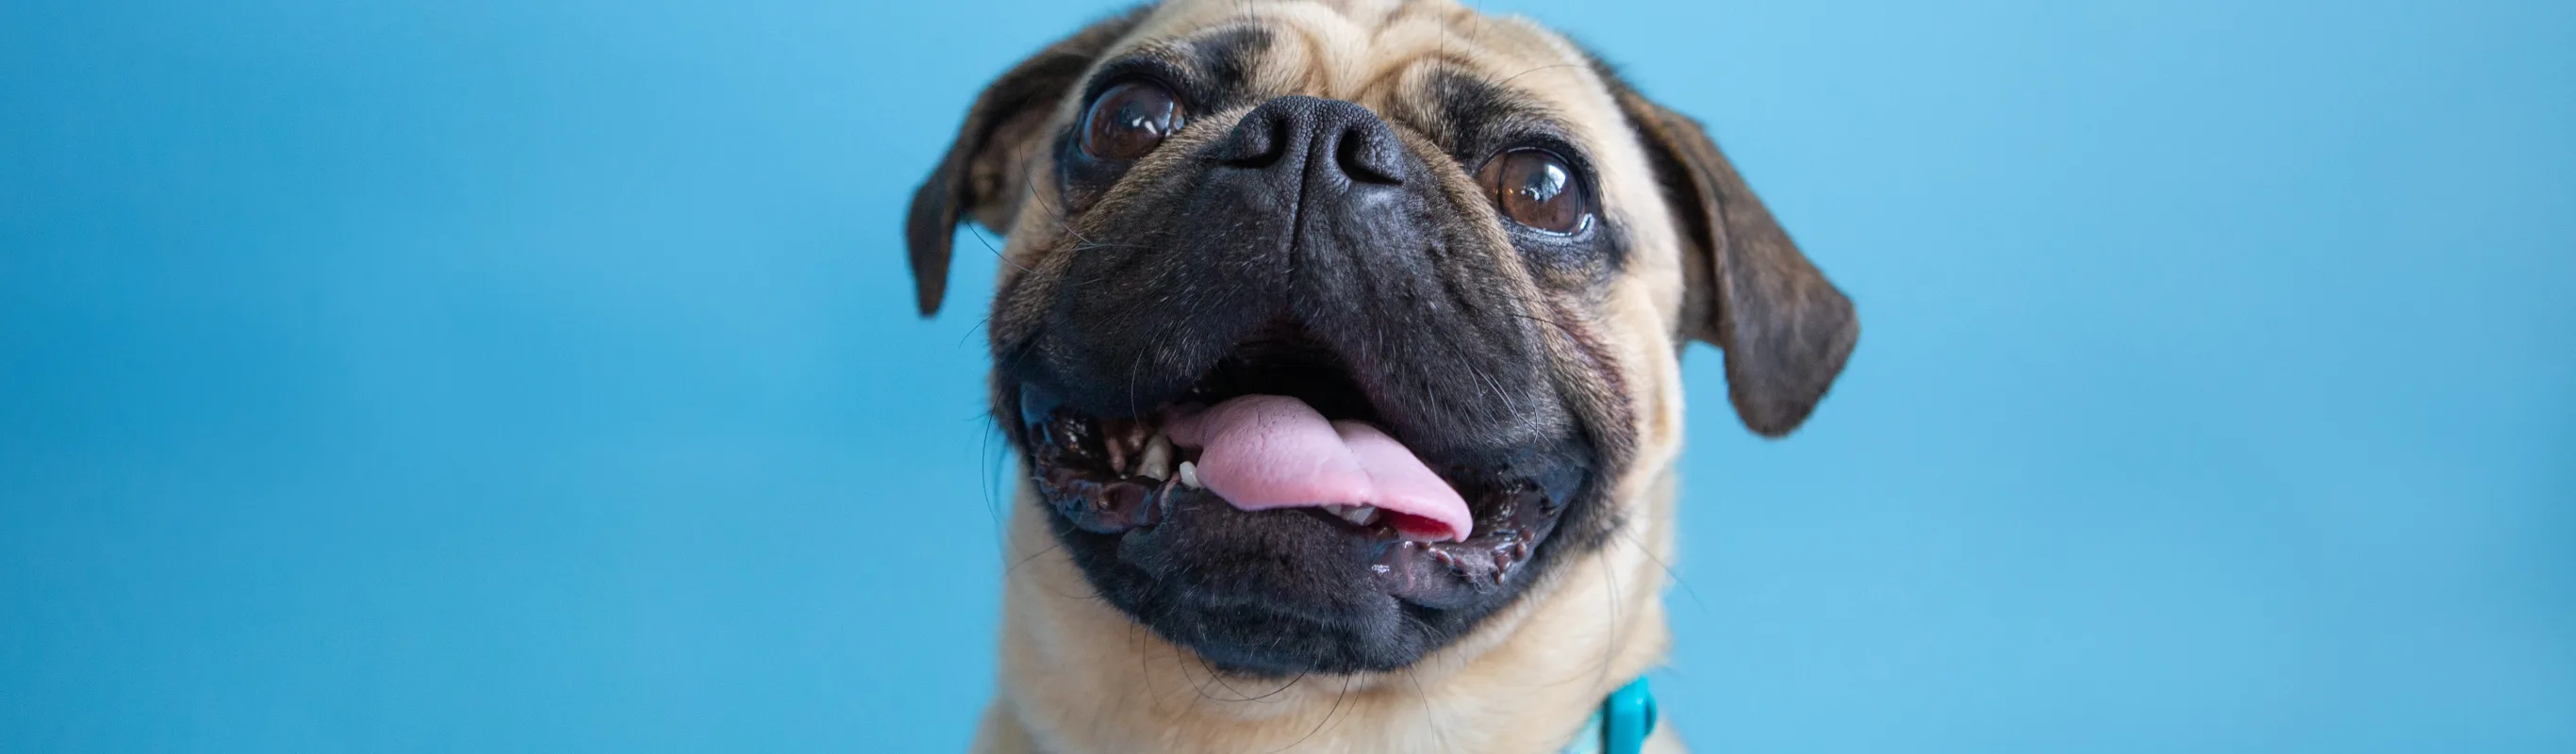 Brownish black pug looking up and smiling with a blue background 